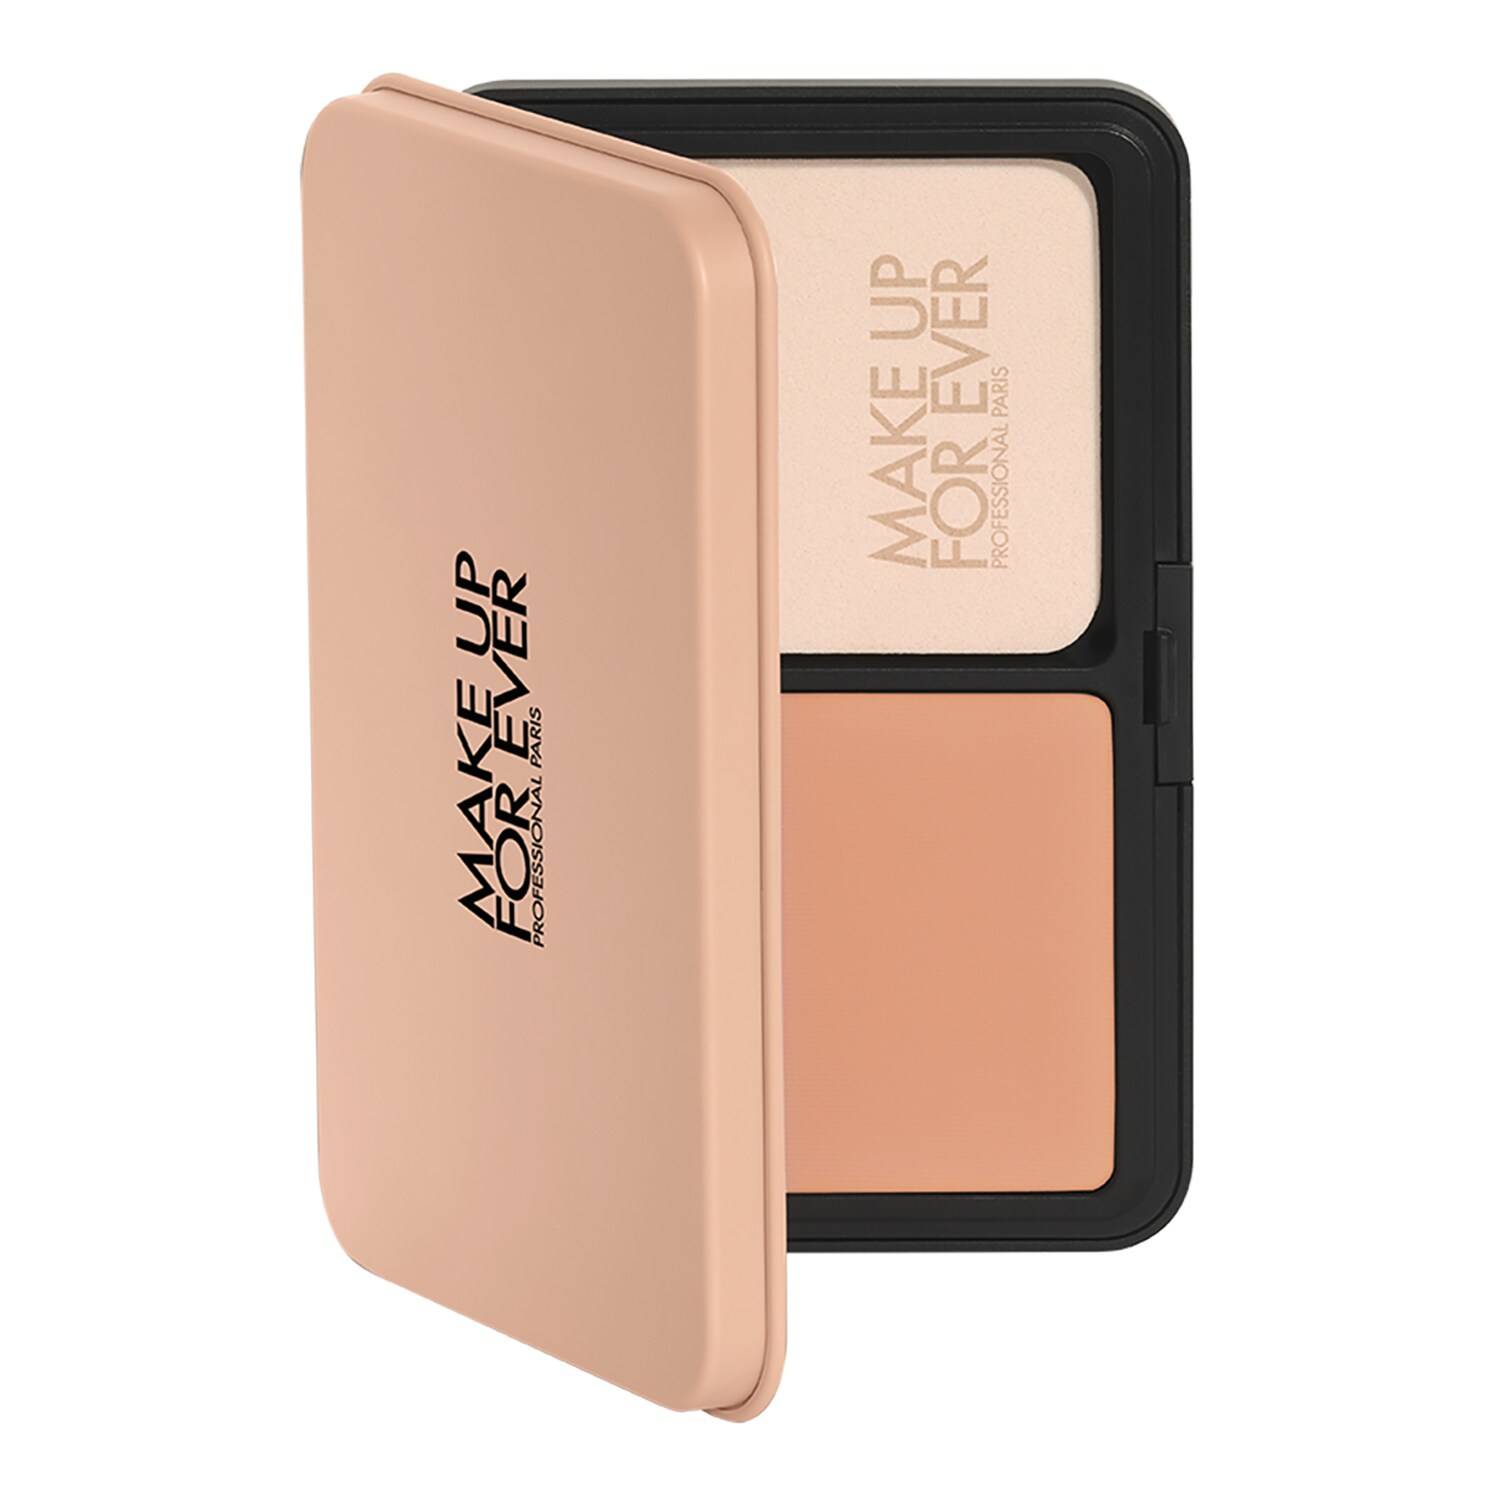 Make Up For Ever Hd Skin Powder Foundation 11G 2R24 - Cool Nude 11G